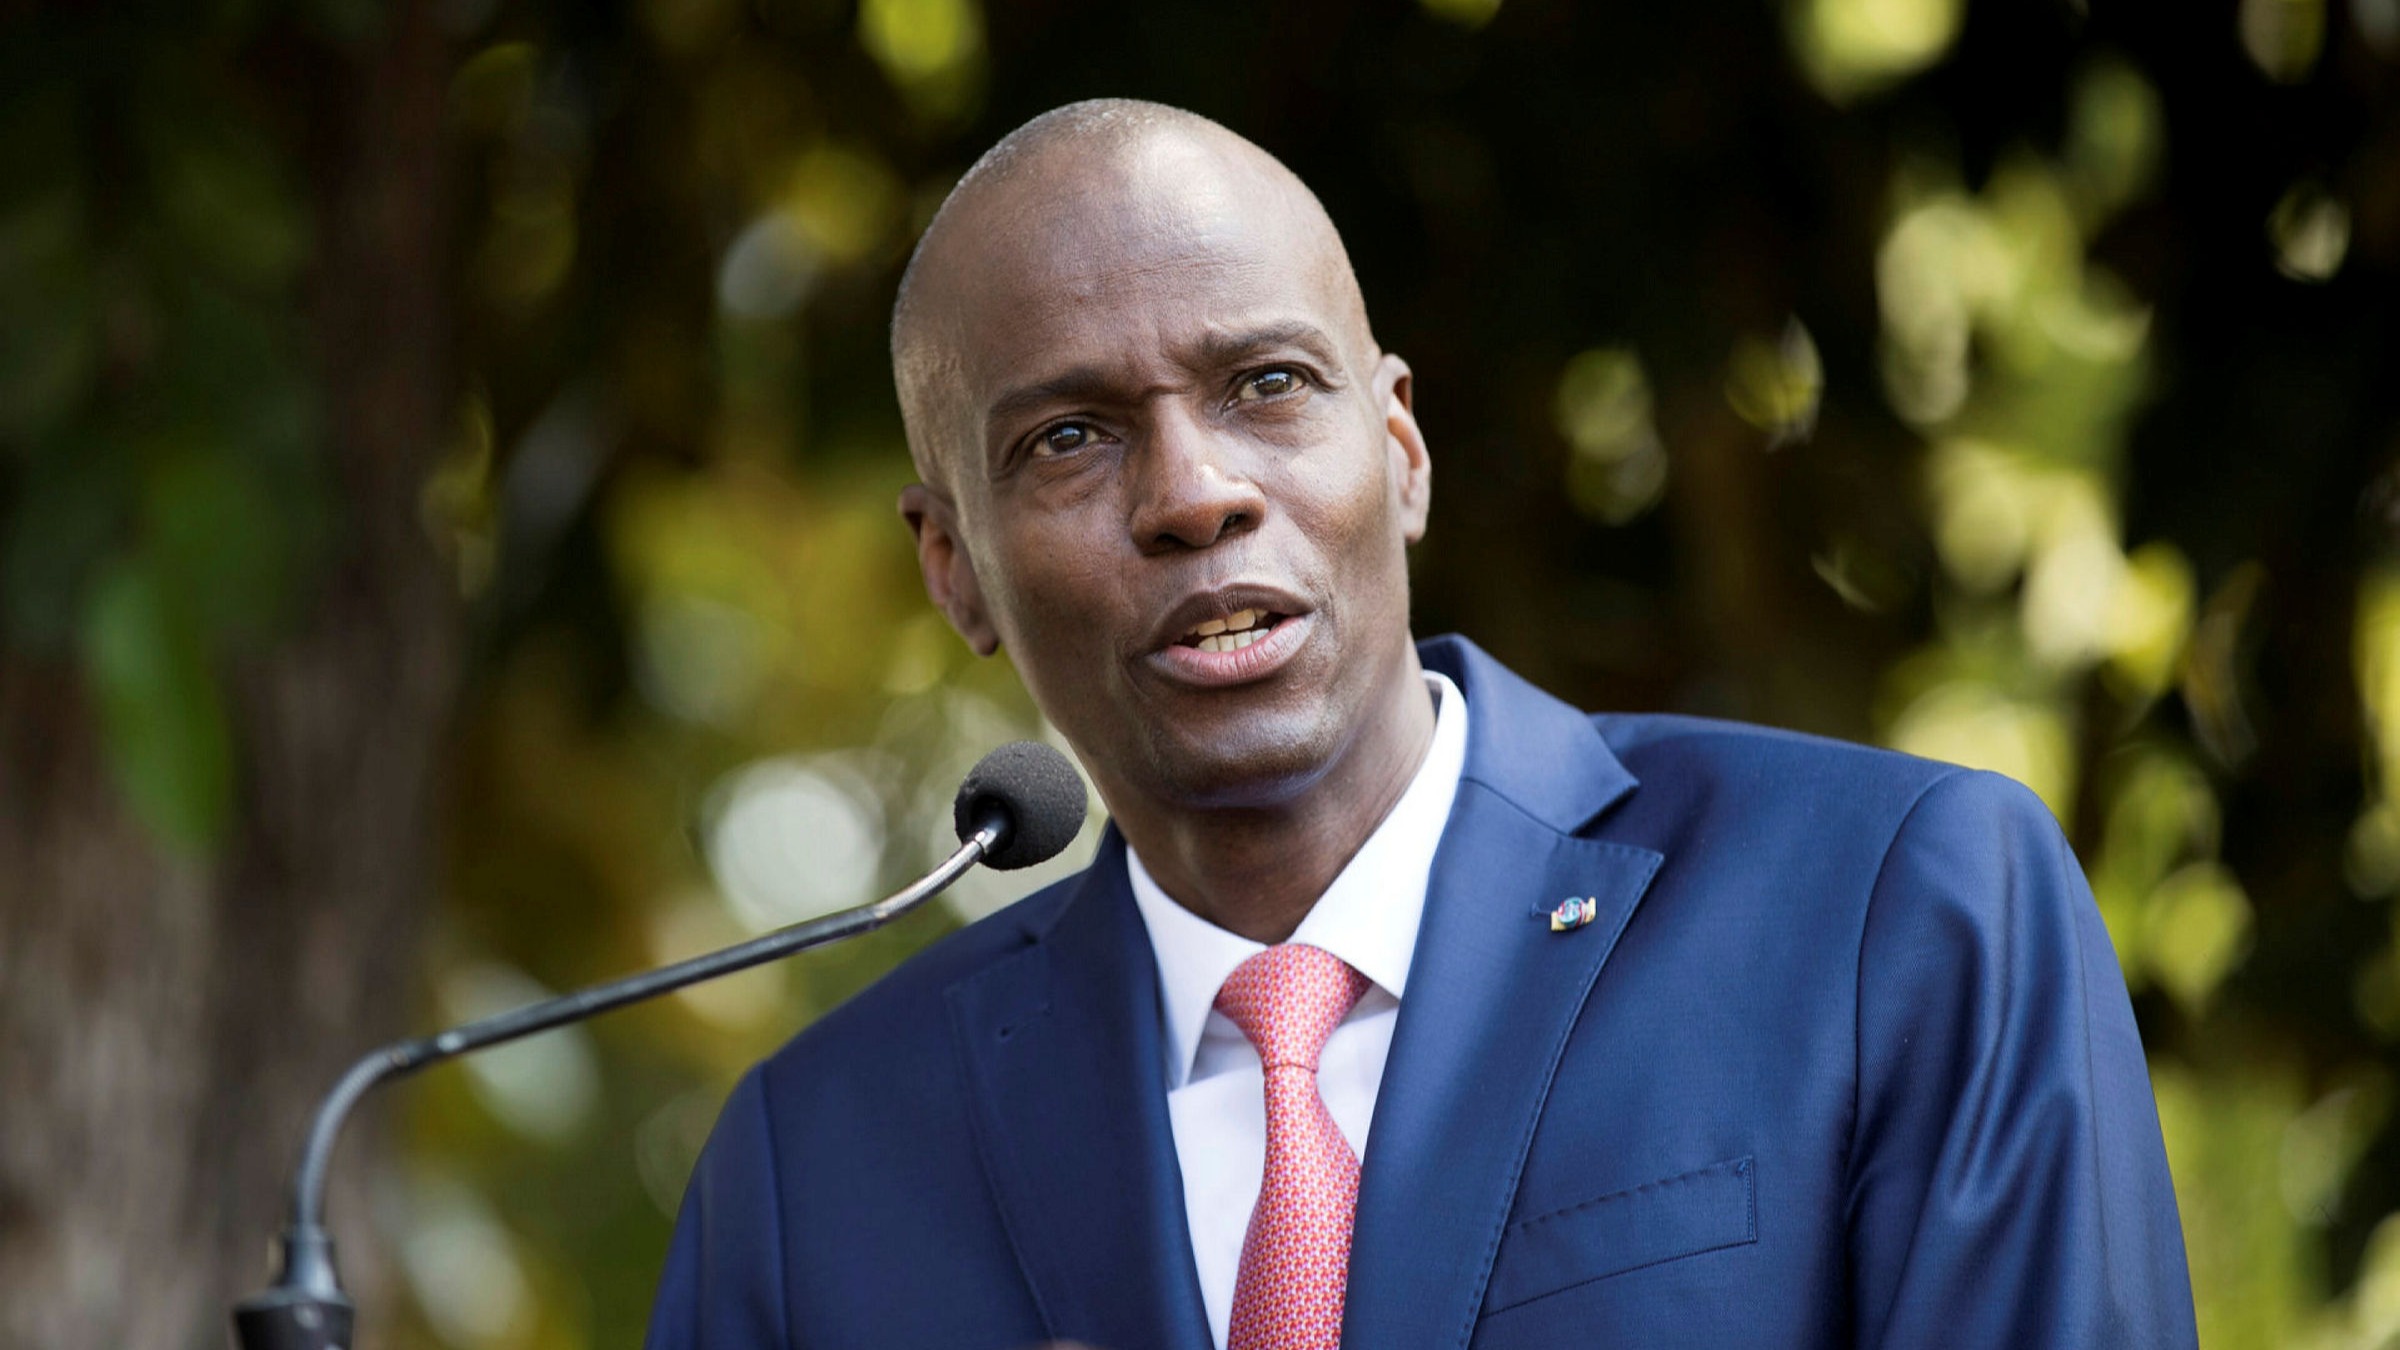 On 7th July 2021 - Haitian President Jovenel Moïse is shot to death